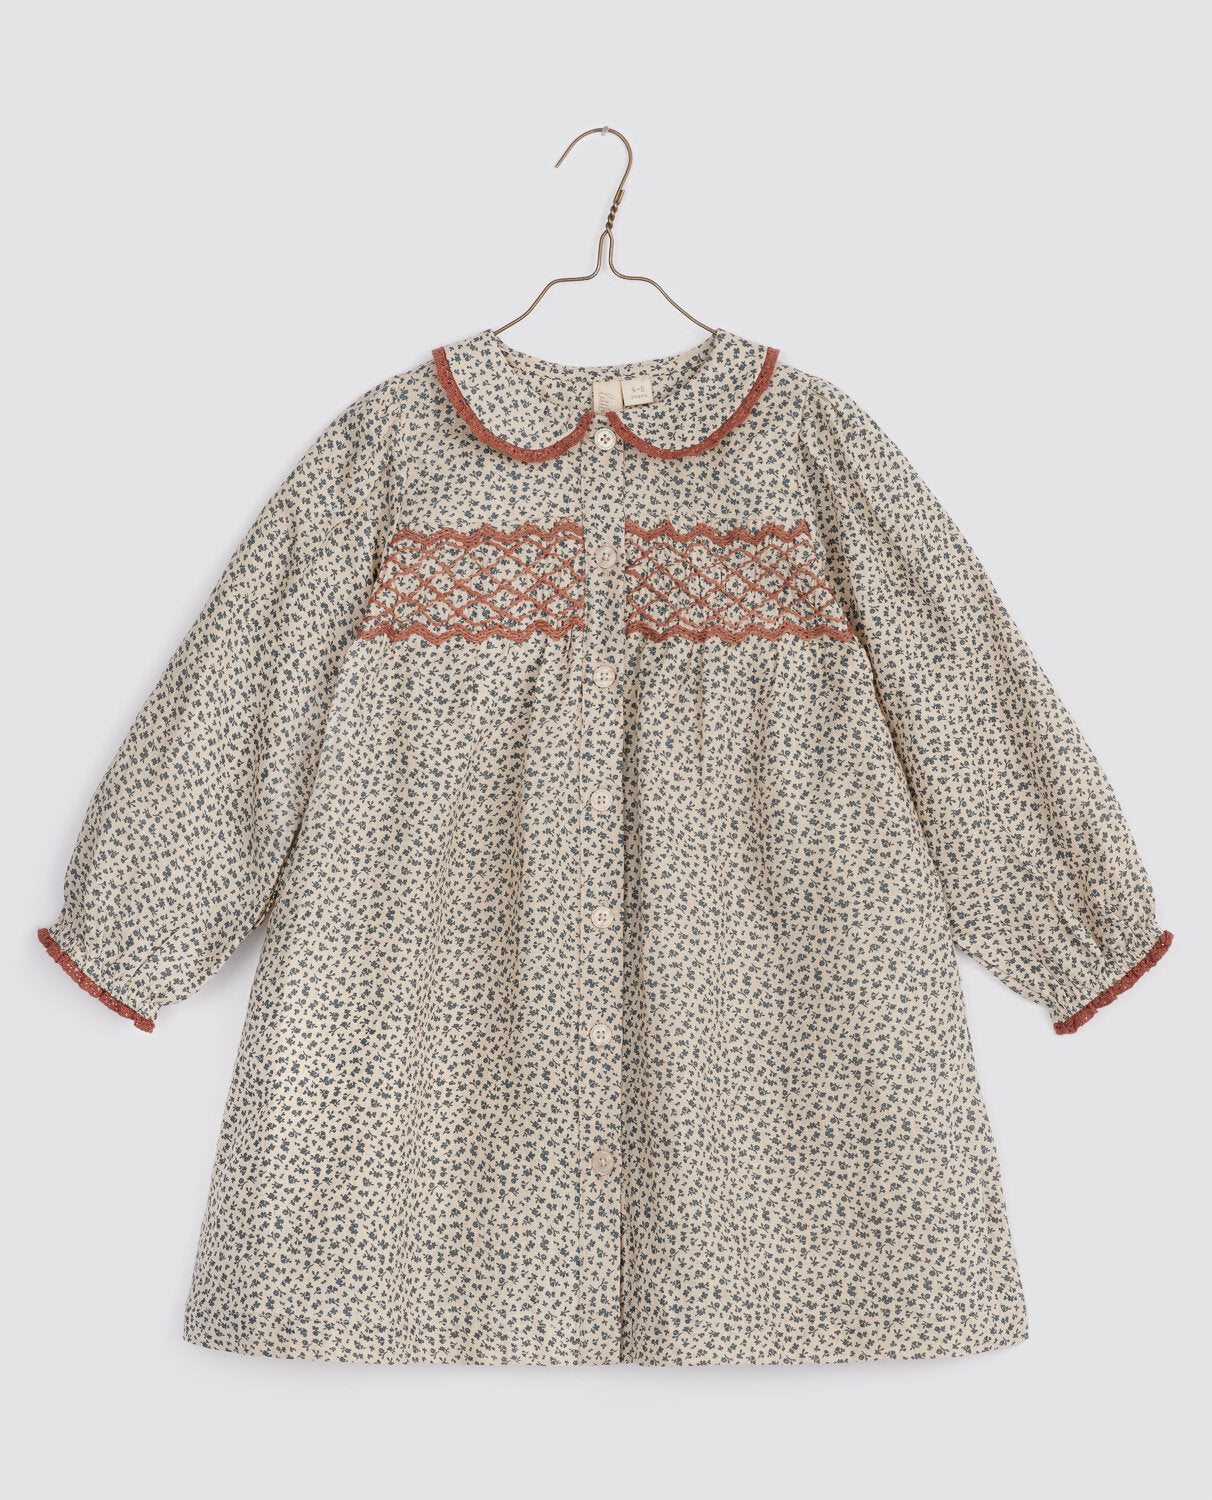 LITTLE COTTON CLOTHES Organic Smocked Kate Dress / cowslip floral in fog